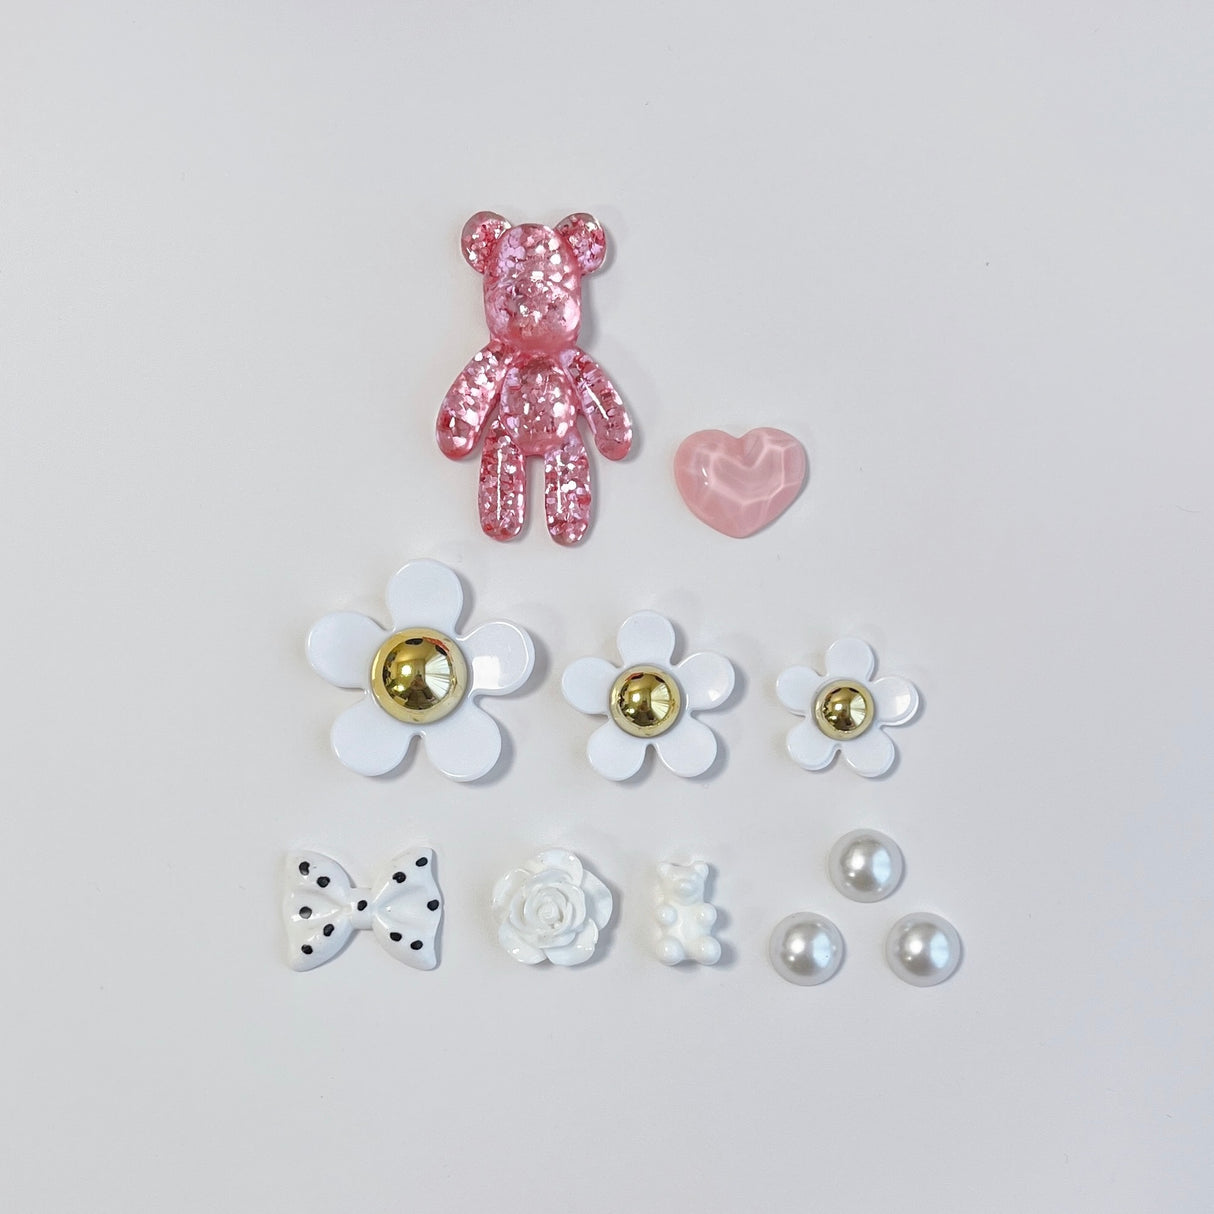 Handcrafted Silver pink bling bear flower shoes charms set 11pcs